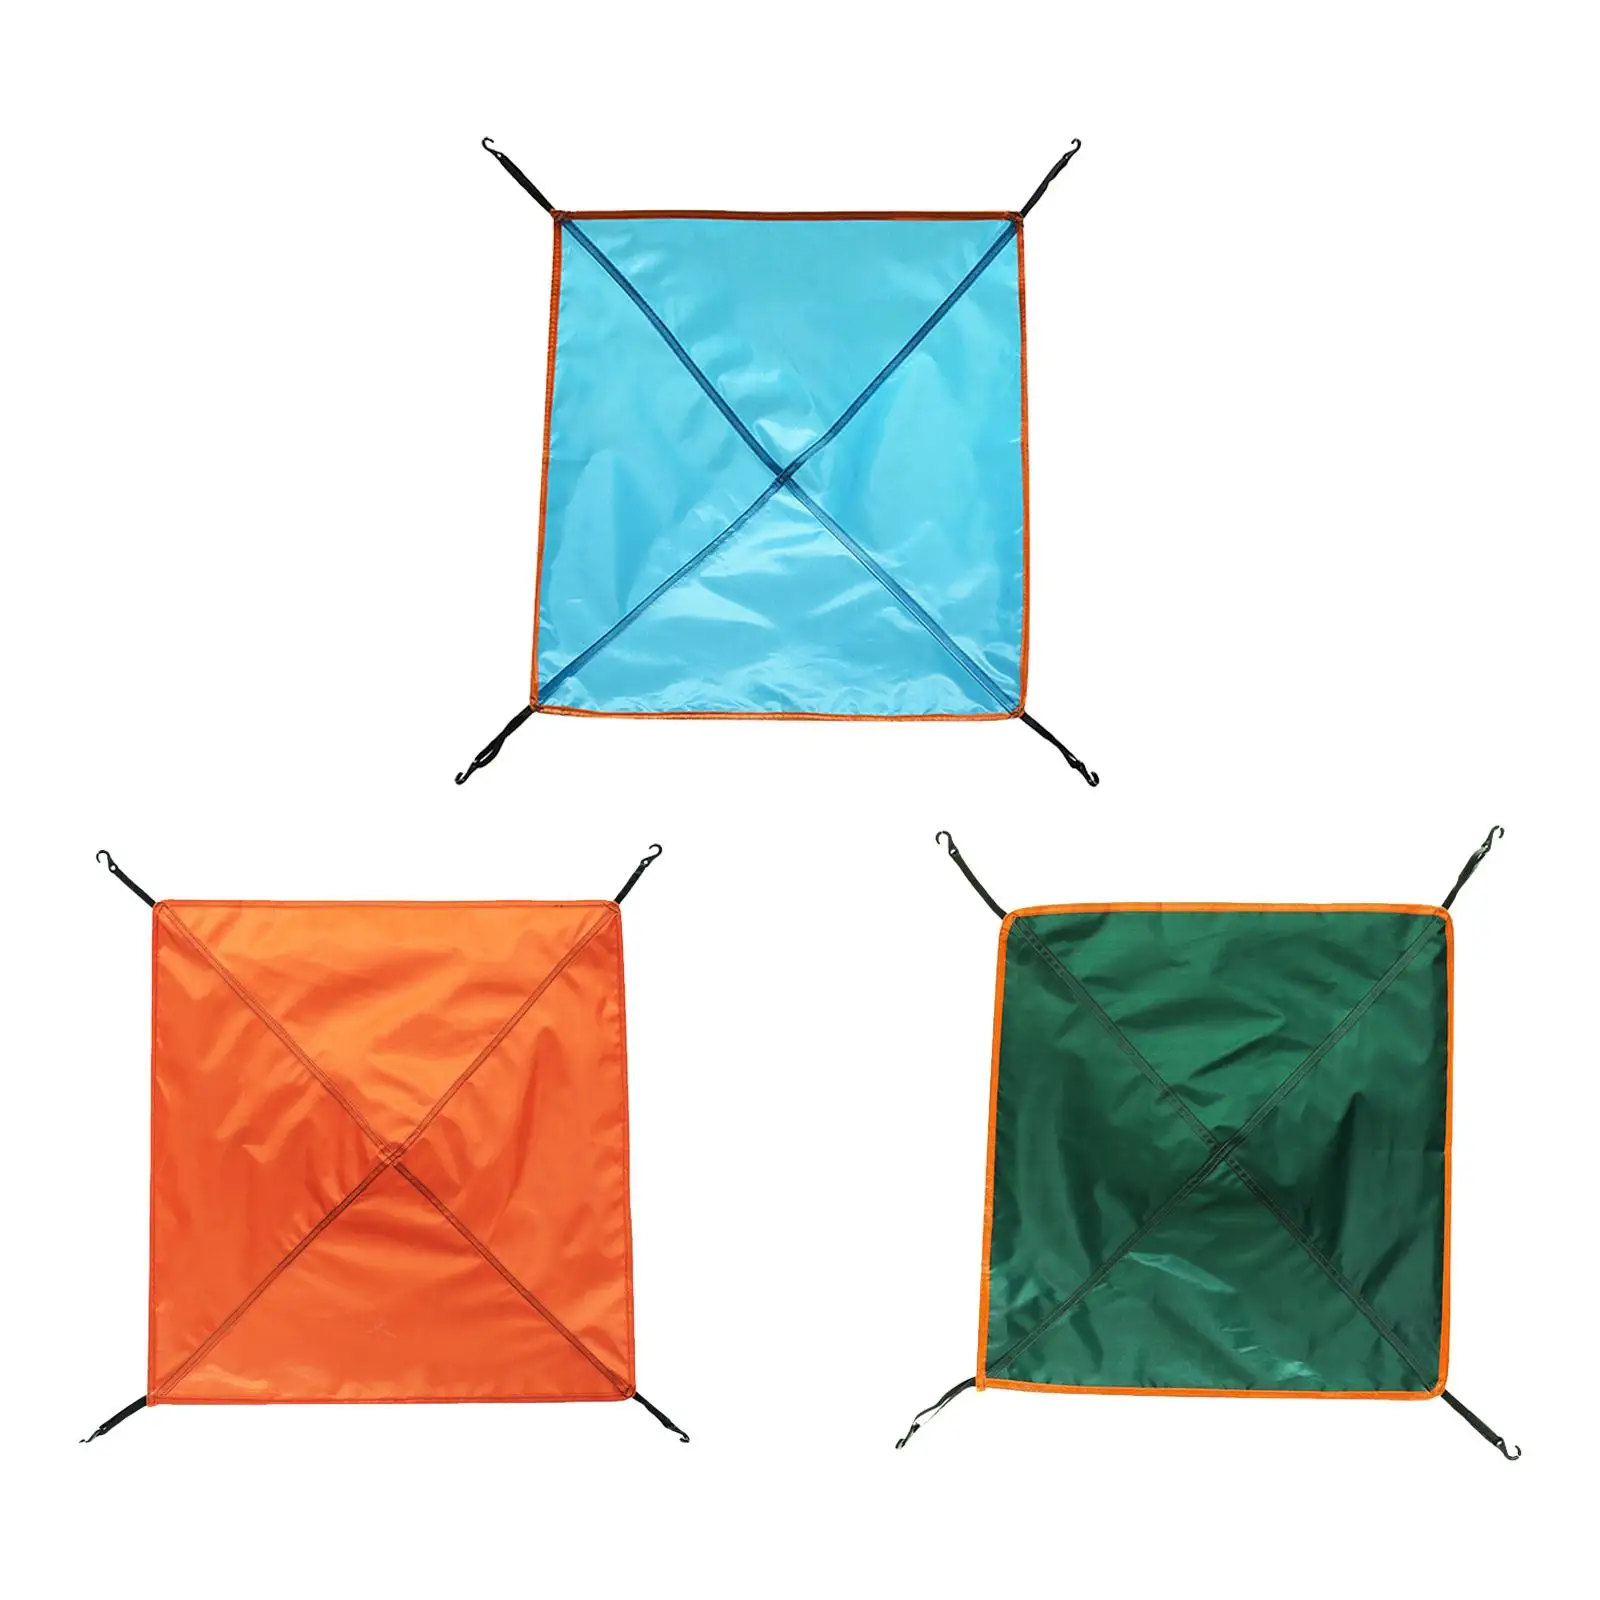 Waterproof Camping , Easy to Cover The  Rain, Large Compact Tent es for  Or under The Tent